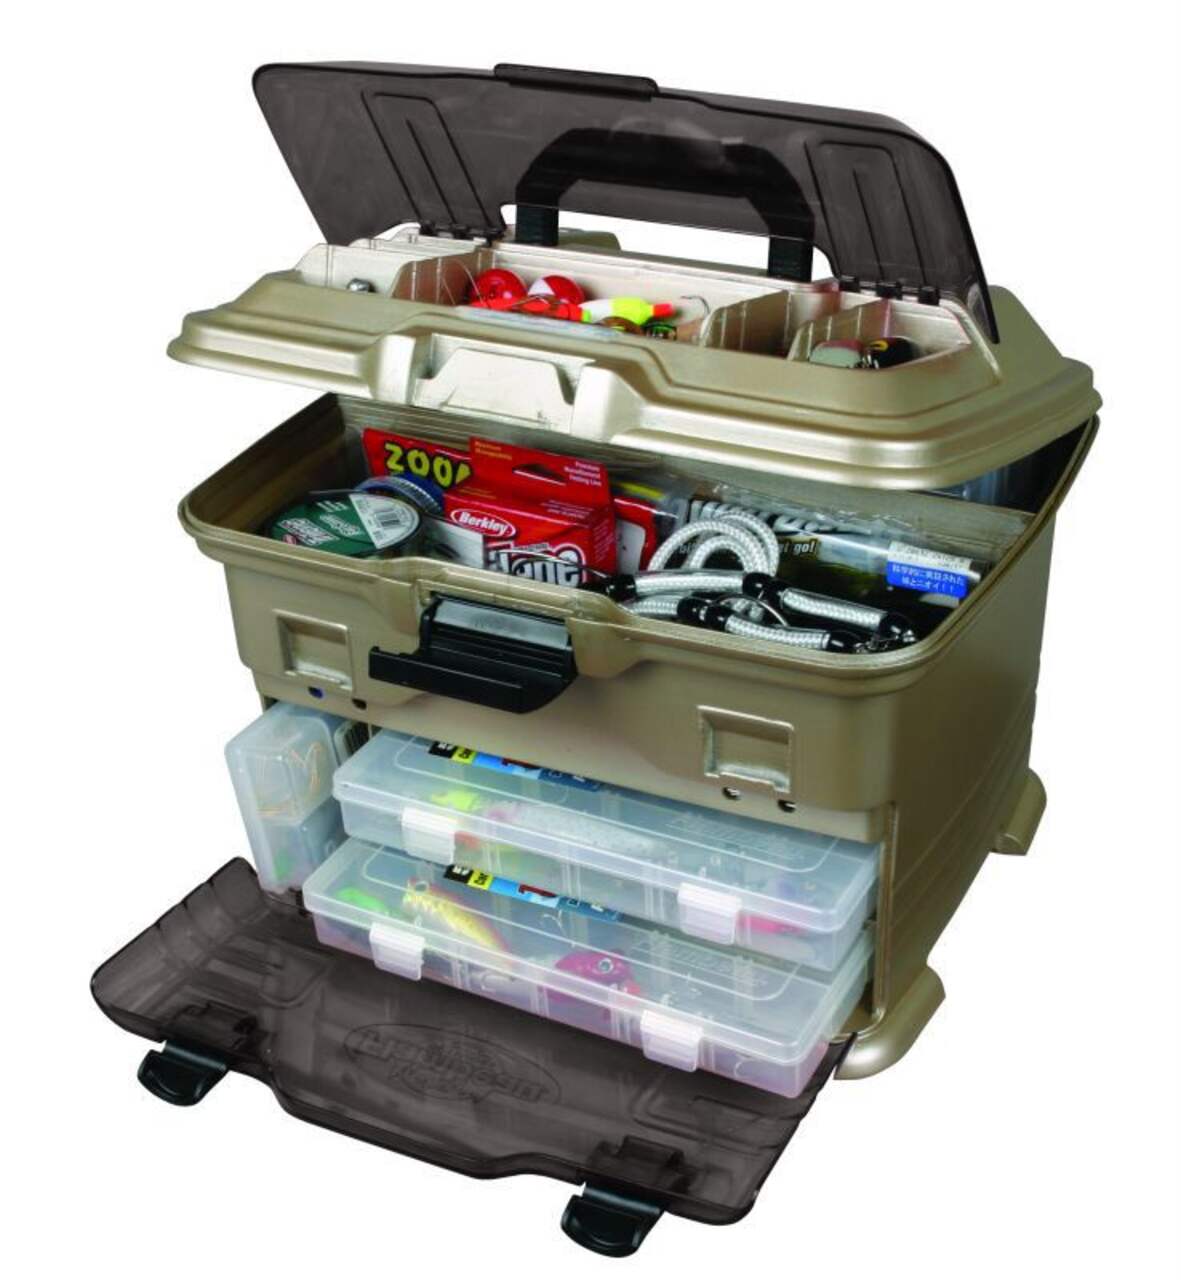 https://media-www.canadiantire.ca/product/playing/fishing/fishing-accessories/0780760/flambeau-t4-multiholder-tacklebox-c8cdcdb7-0e01-4766-99d4-e47f3ac45886-jpgrendition.jpg?imdensity=1&imwidth=640&impolicy=mZoom